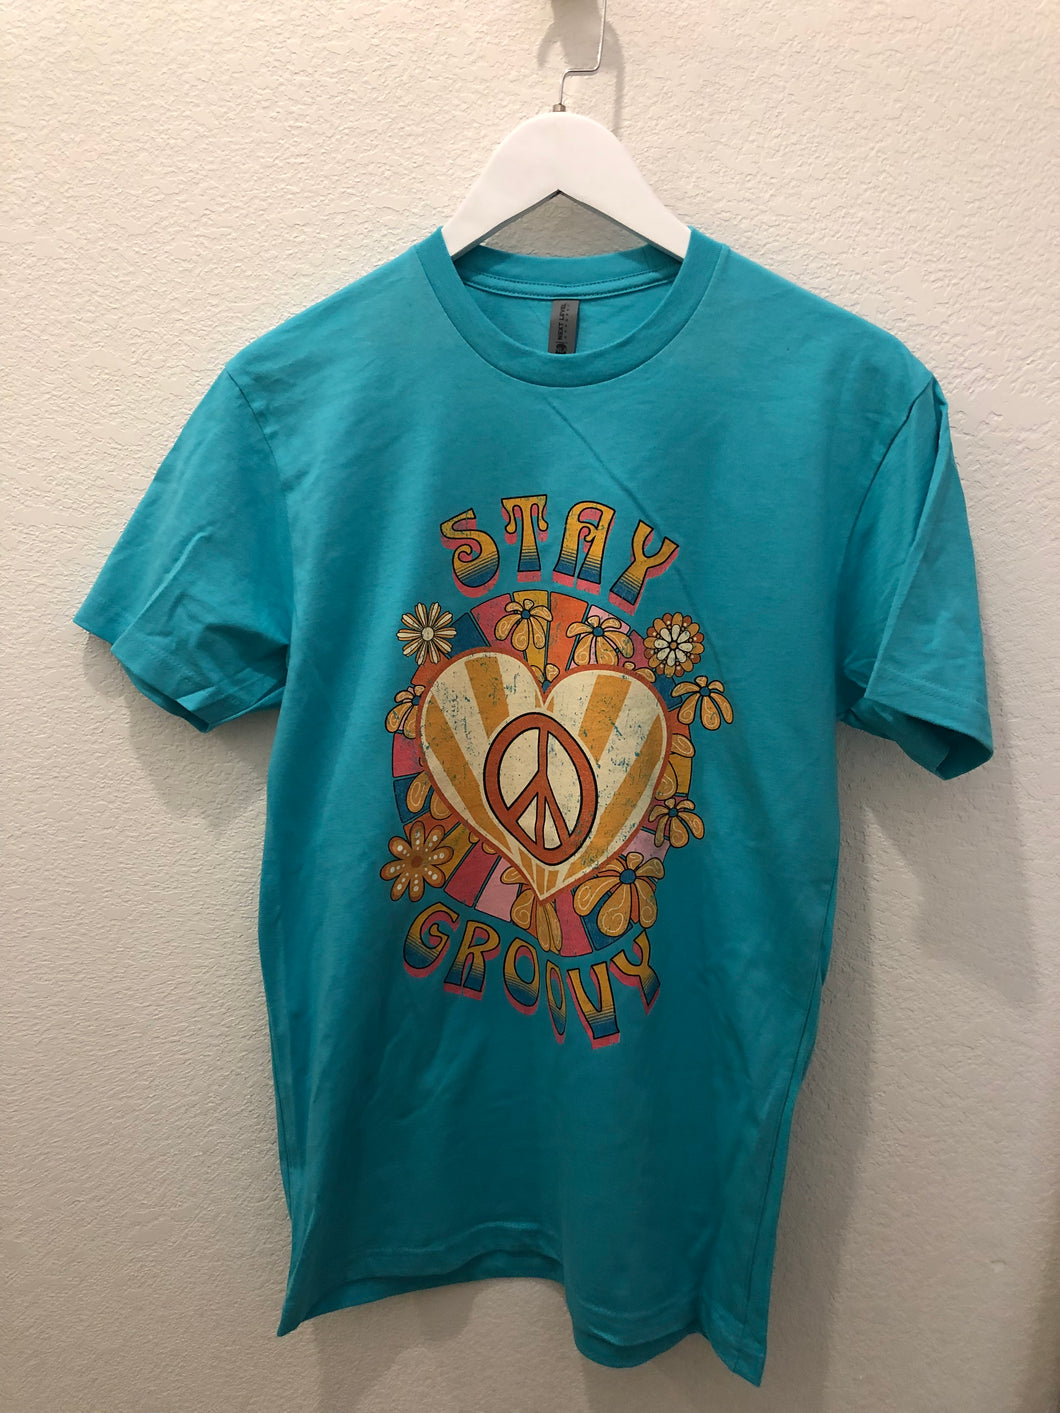 Stay Groovy T-shirt